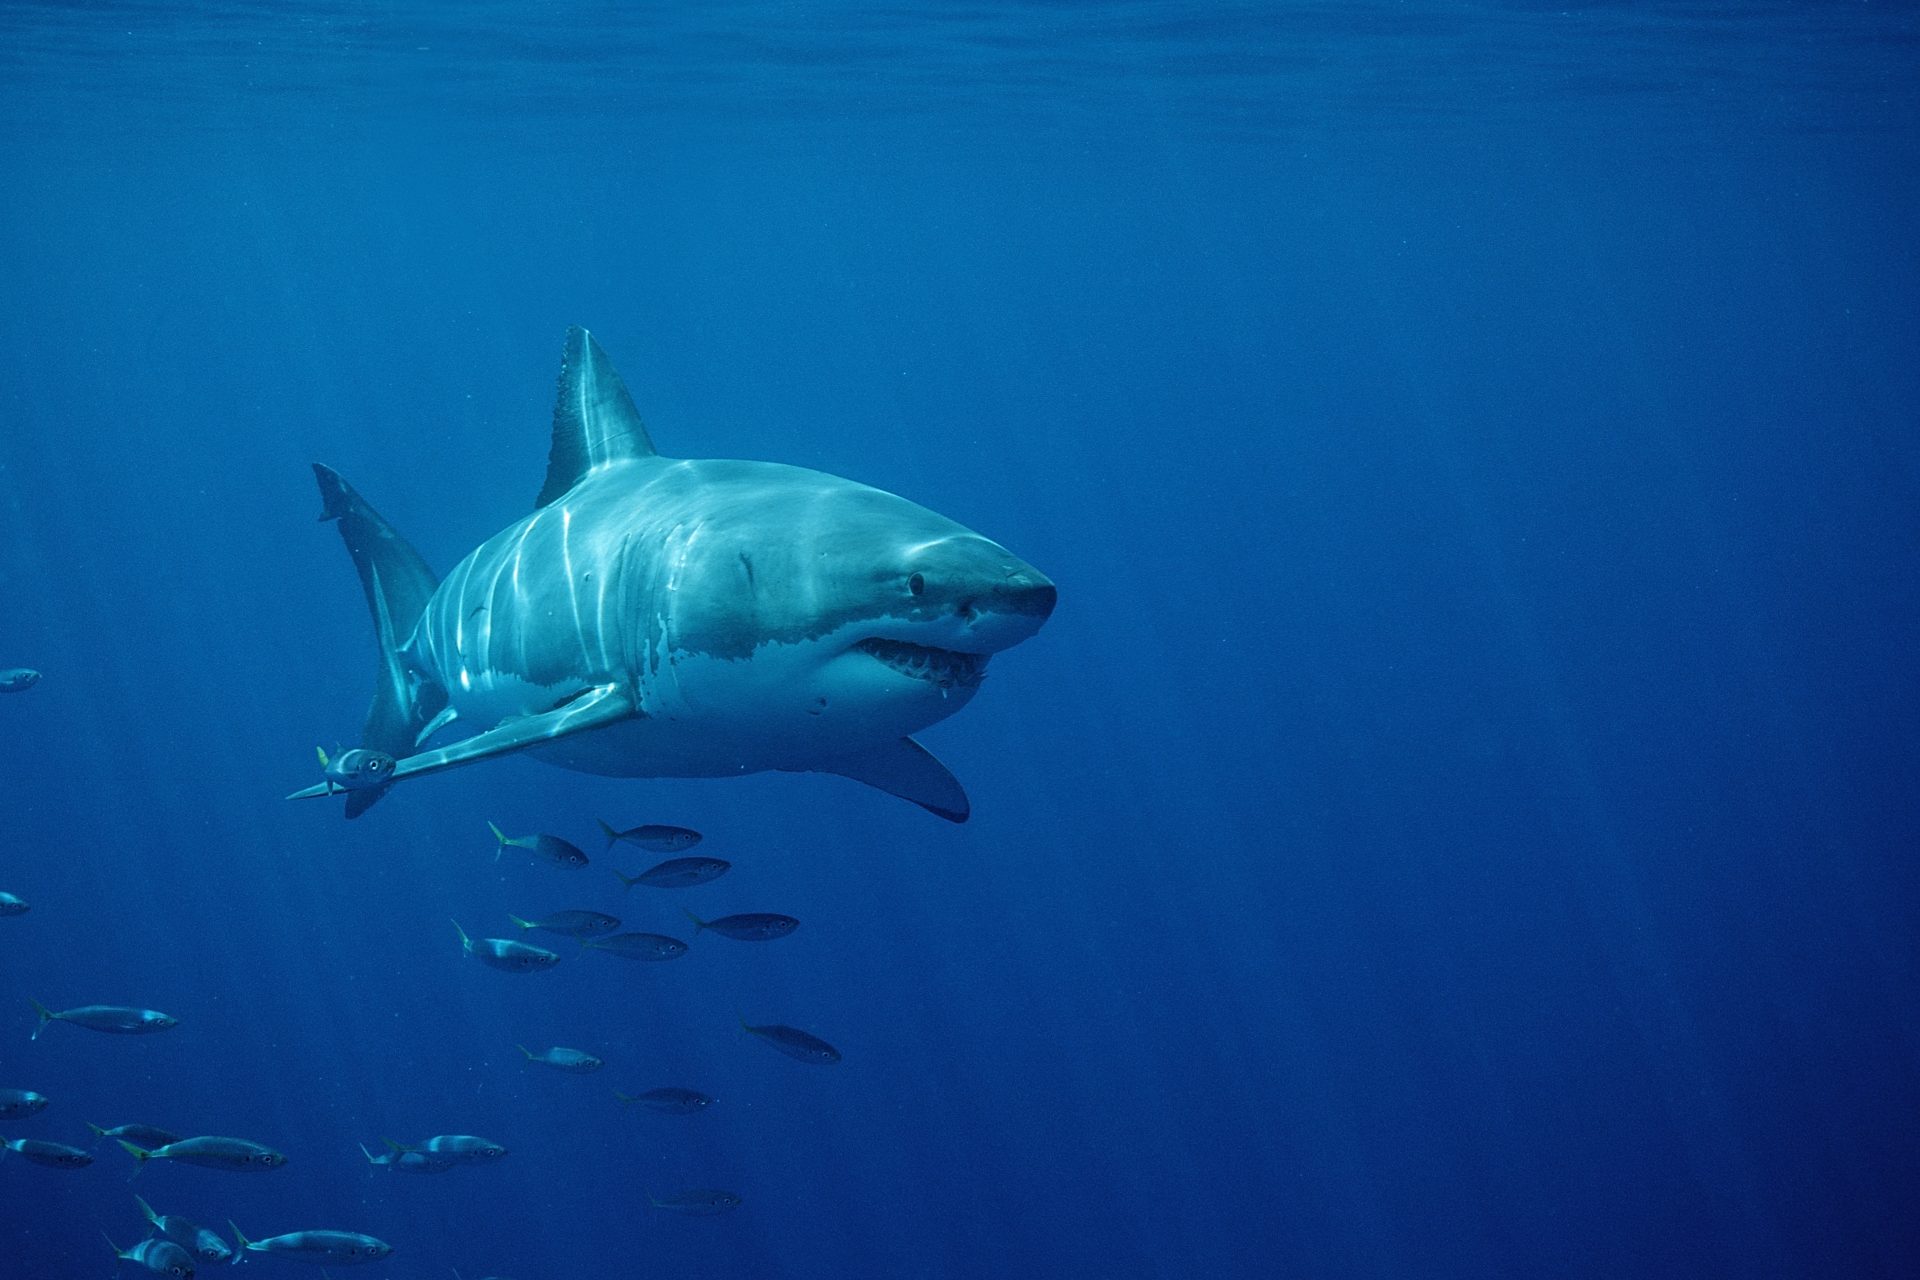 Great white shark sighting on the rise